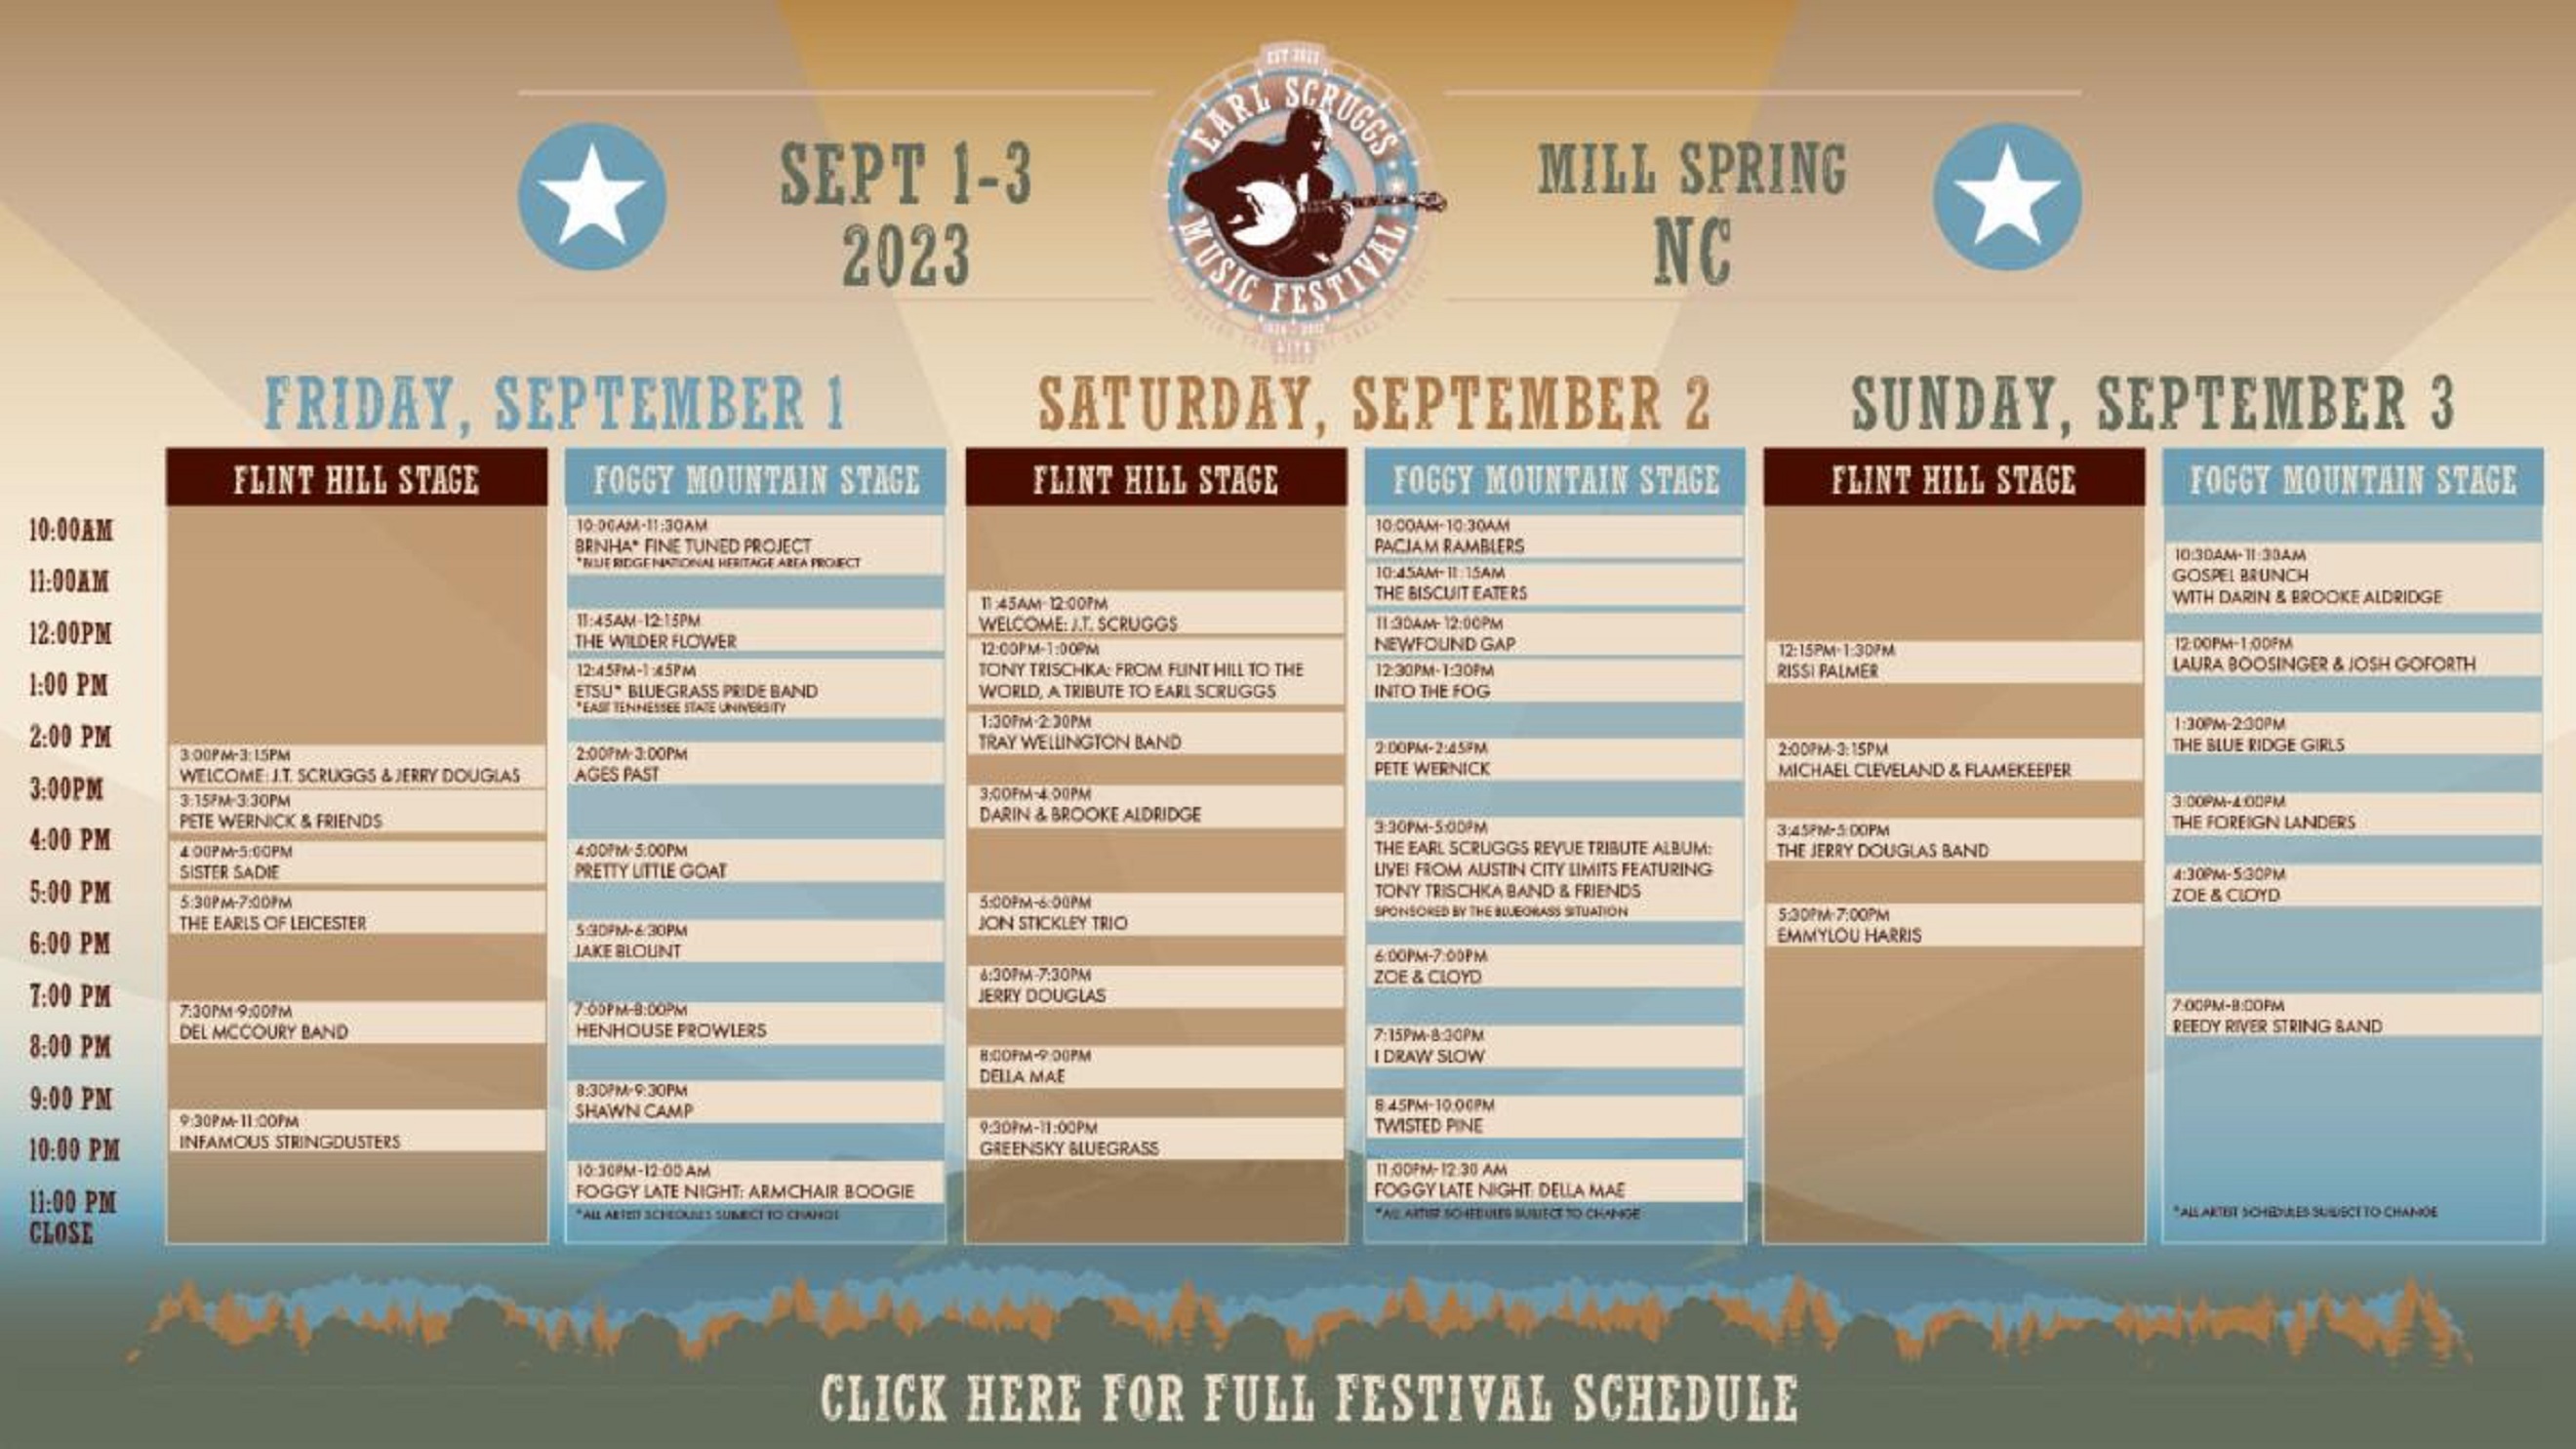 EARL SCRUGGS MUSIC FESTIVAL Shares Daily Schedules for 2023 Event